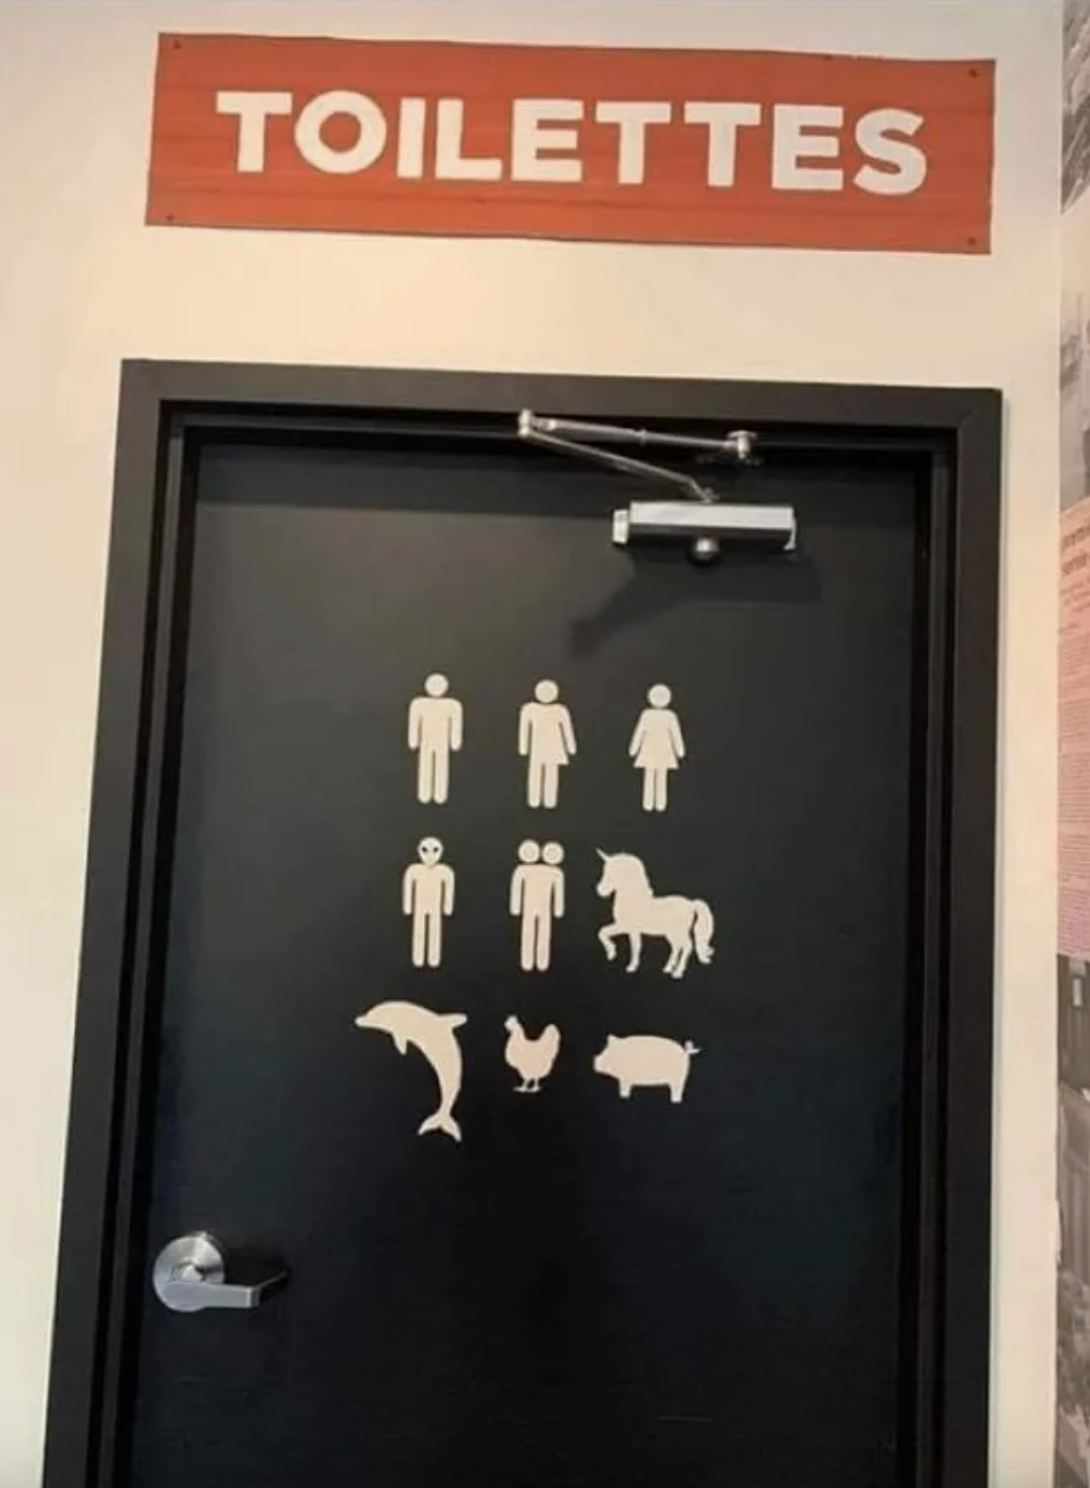 A bathroom door has the typical male and female graphics, as well as ones indicating non-binary, aliens, people with two heads, unicorns, dolphins, chickens, and pigs&quot;